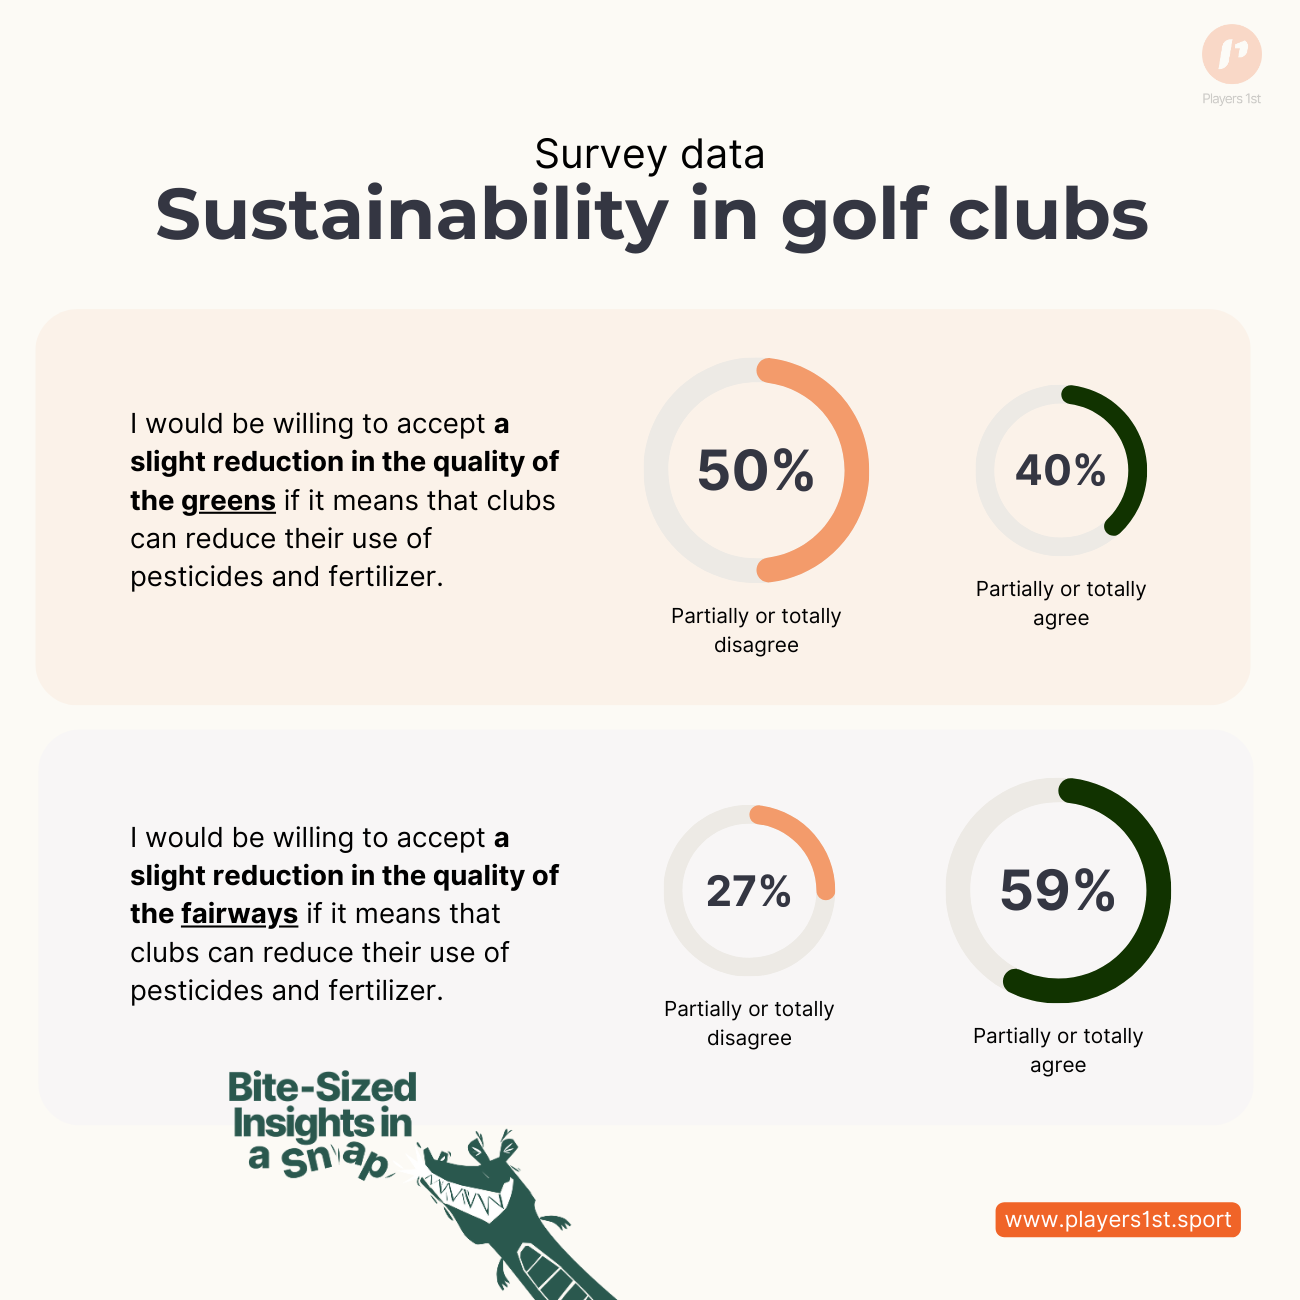 Golfers perspective on reducing fertilizers and pesticides and their influence on greens and fairways.